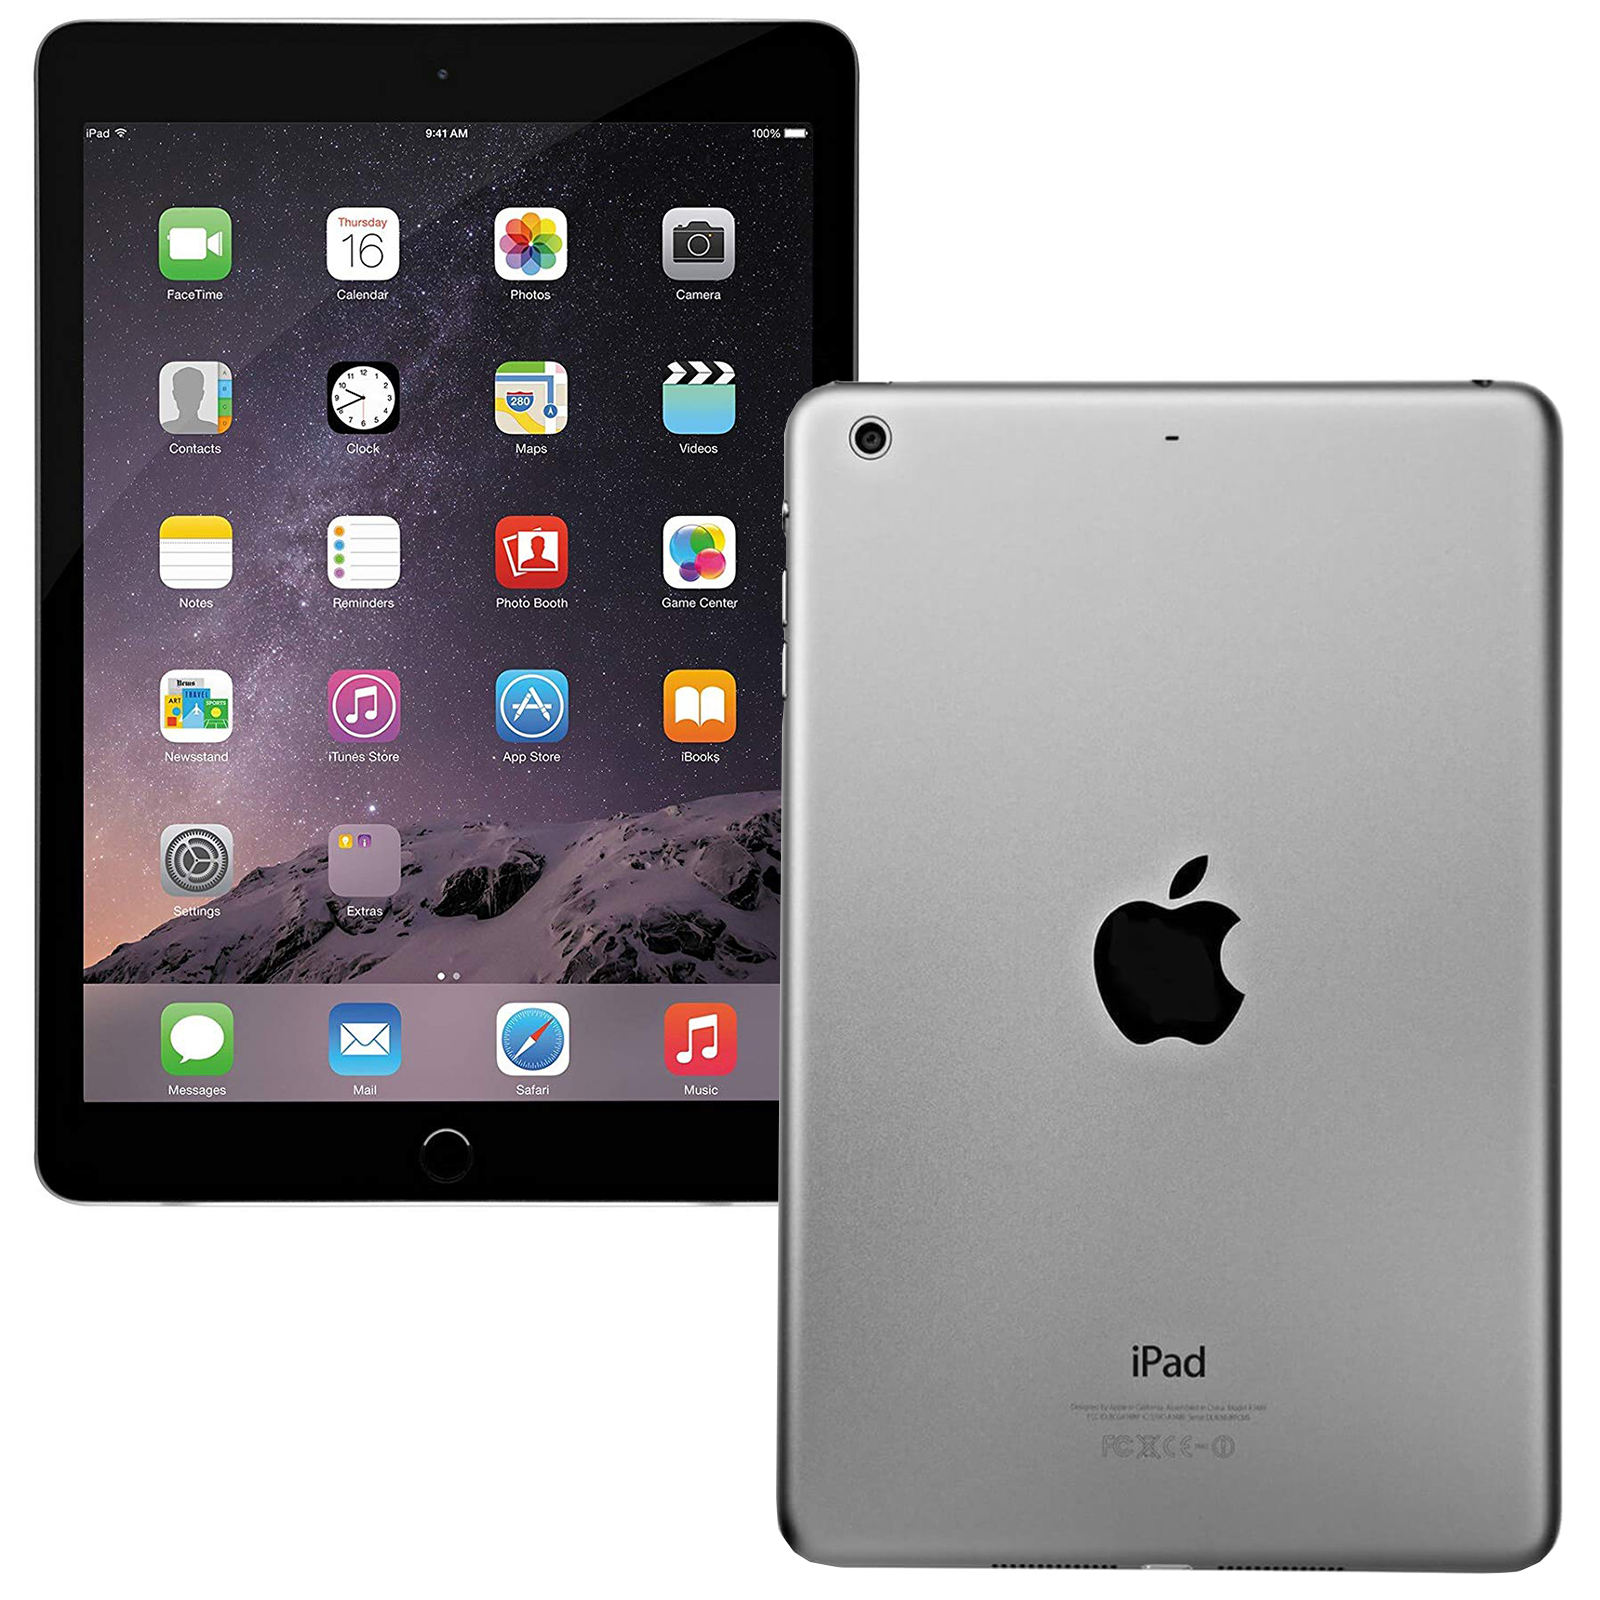 Restored Apple iPad Air 9.7" Retina Display 32GB WiFi Tablet - Space Gray - MD786LL/A (Refurbished) - image 3 of 5